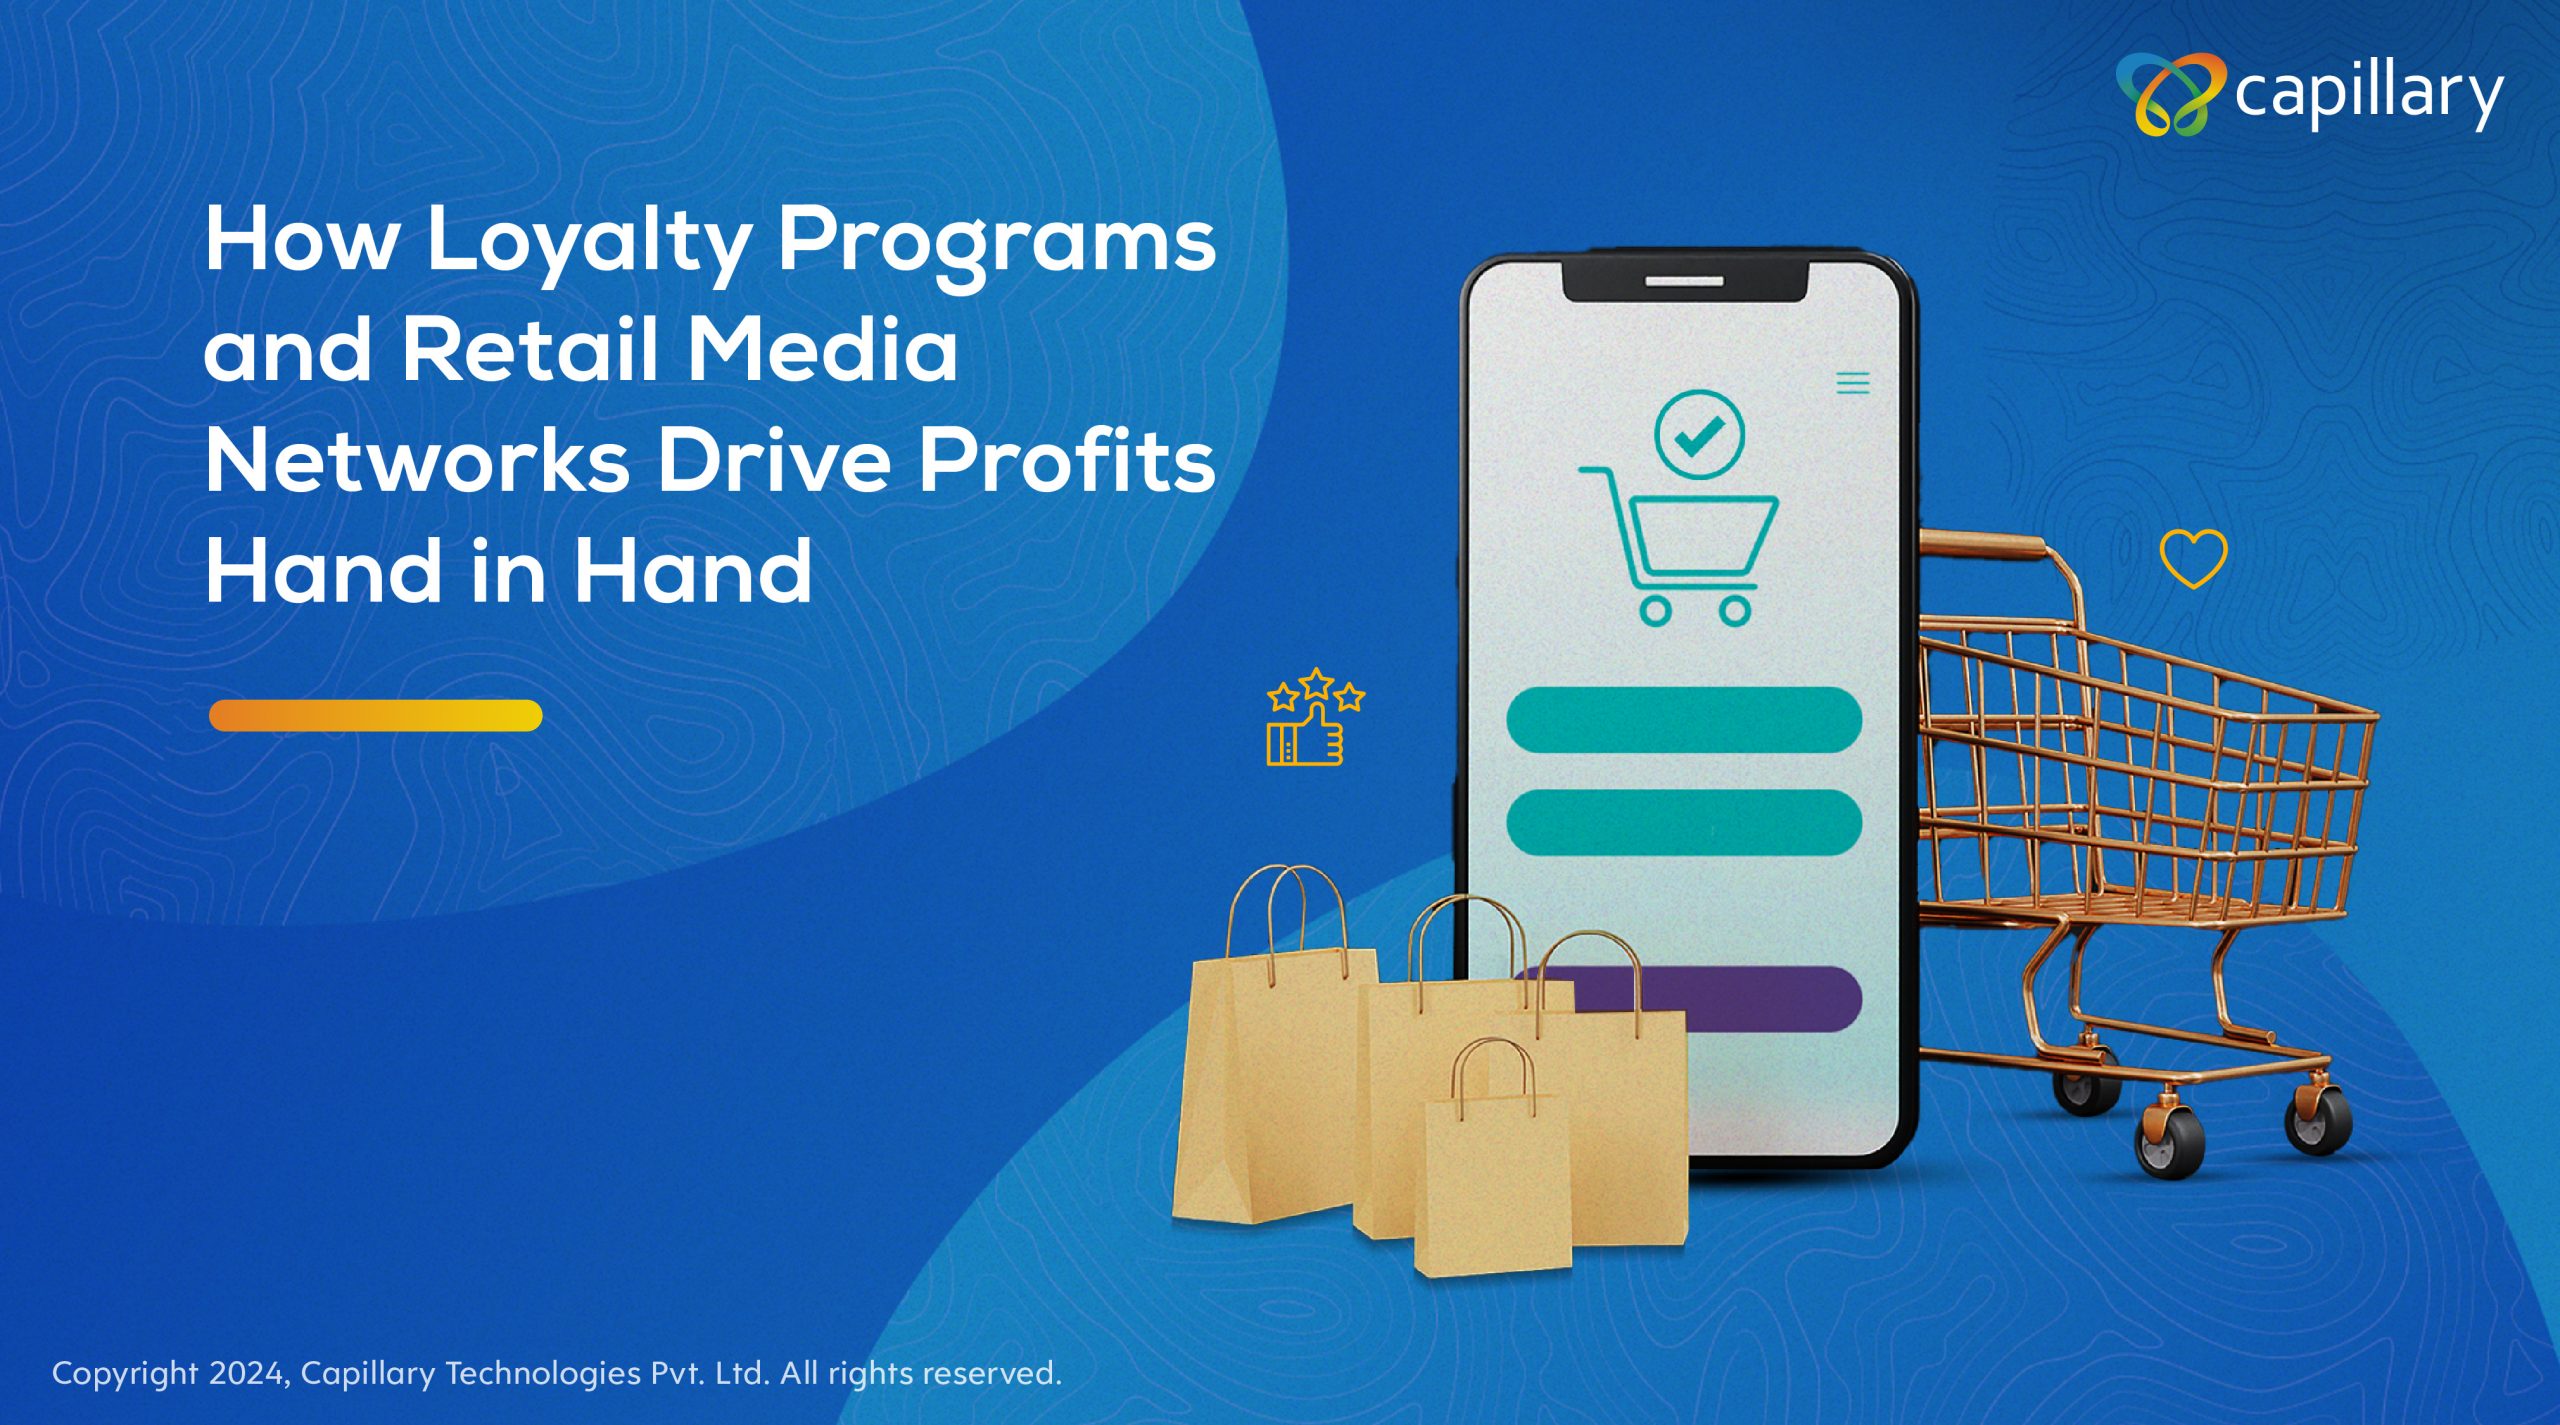 Retail media network and loyalty programs